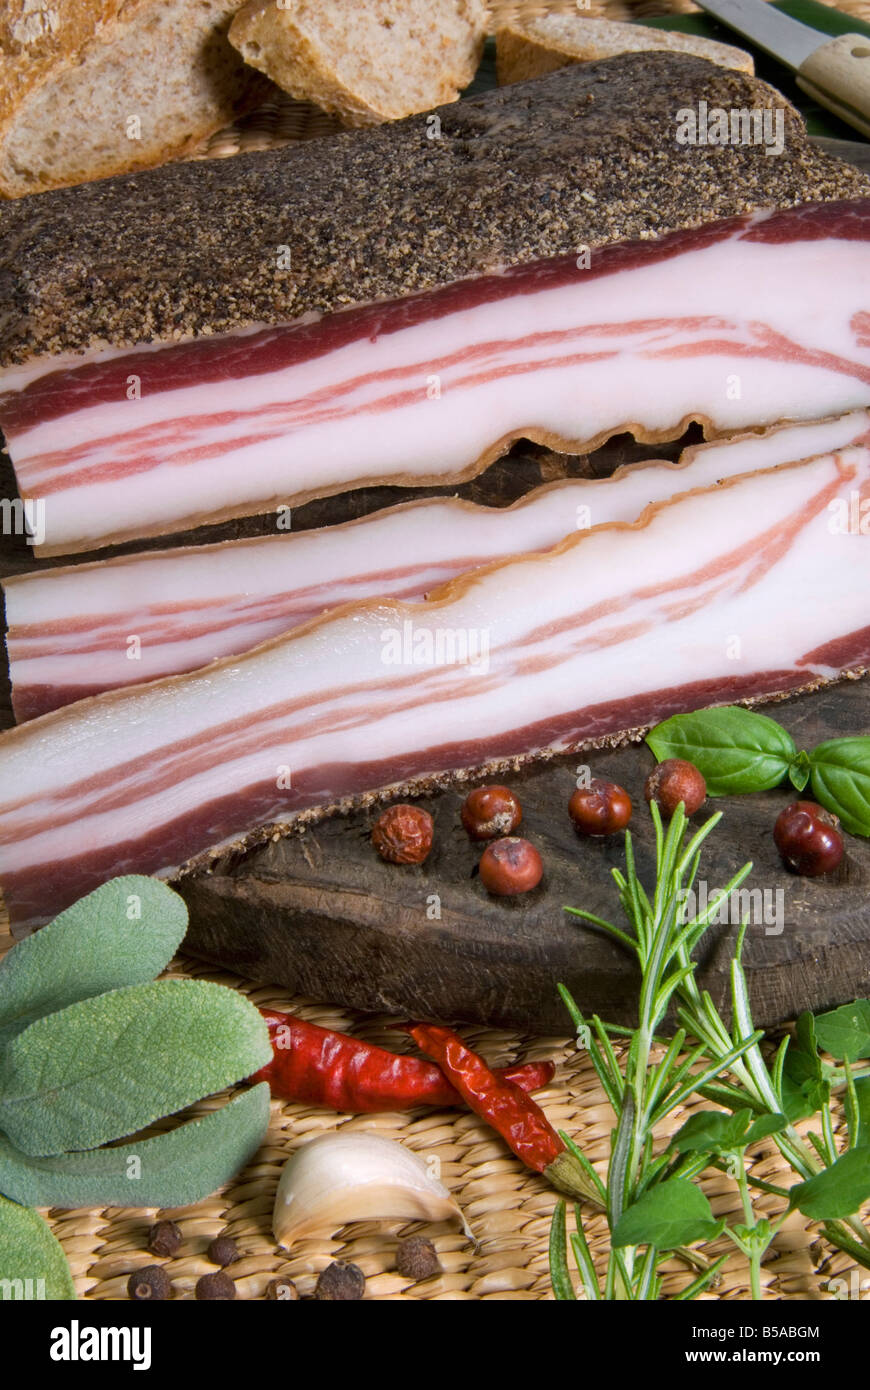 Bacon italien, Italy, Europe Banque D'Images